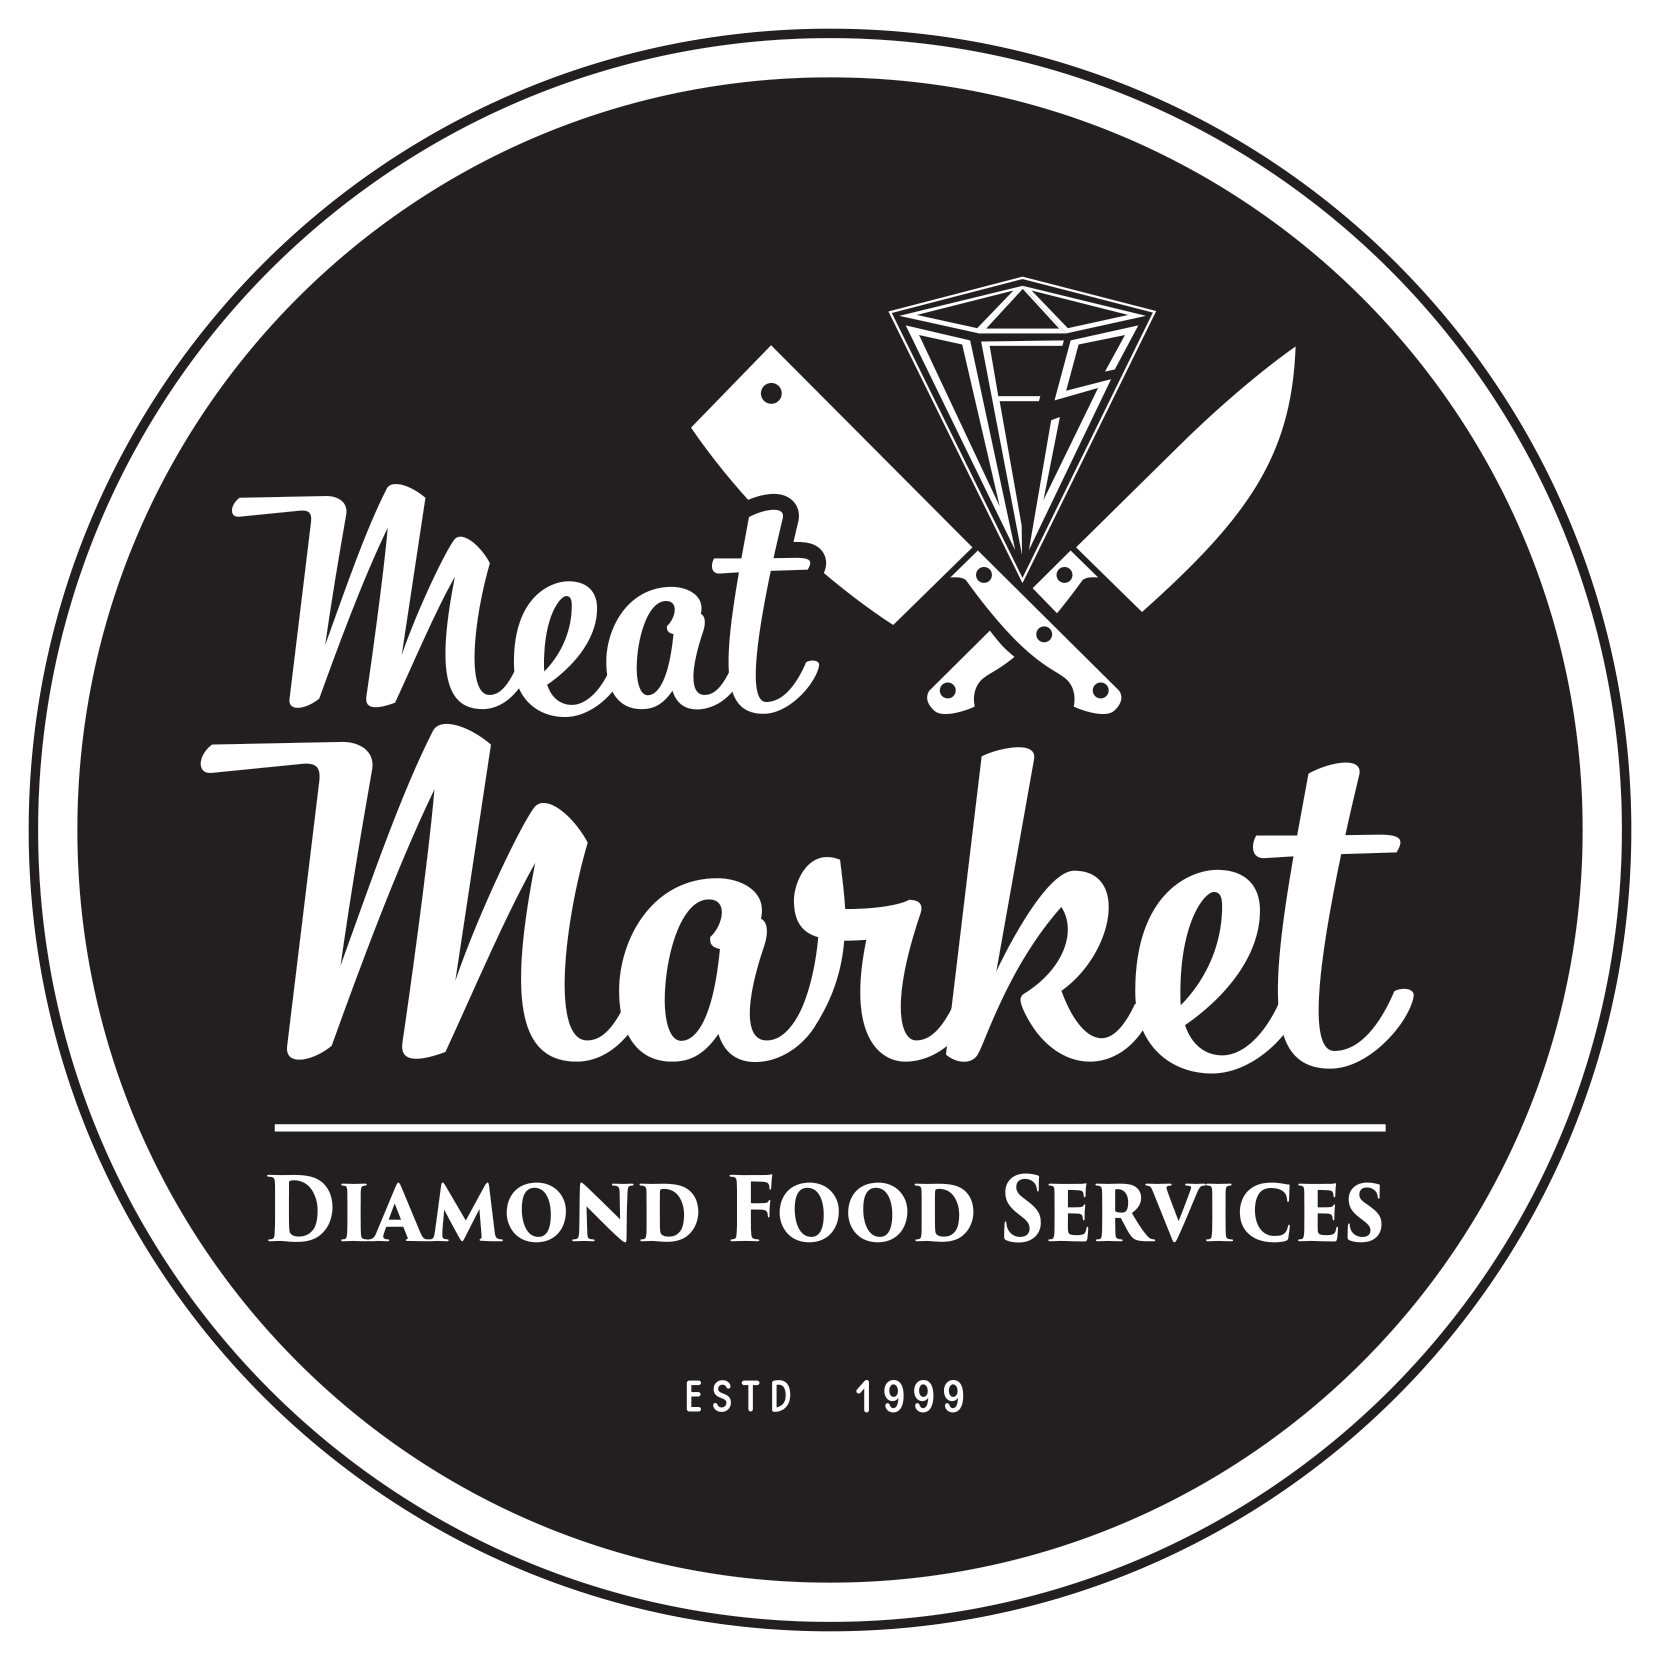 Diamond Food Services | Meat Wholesalers | Fresh Lamb Specialists